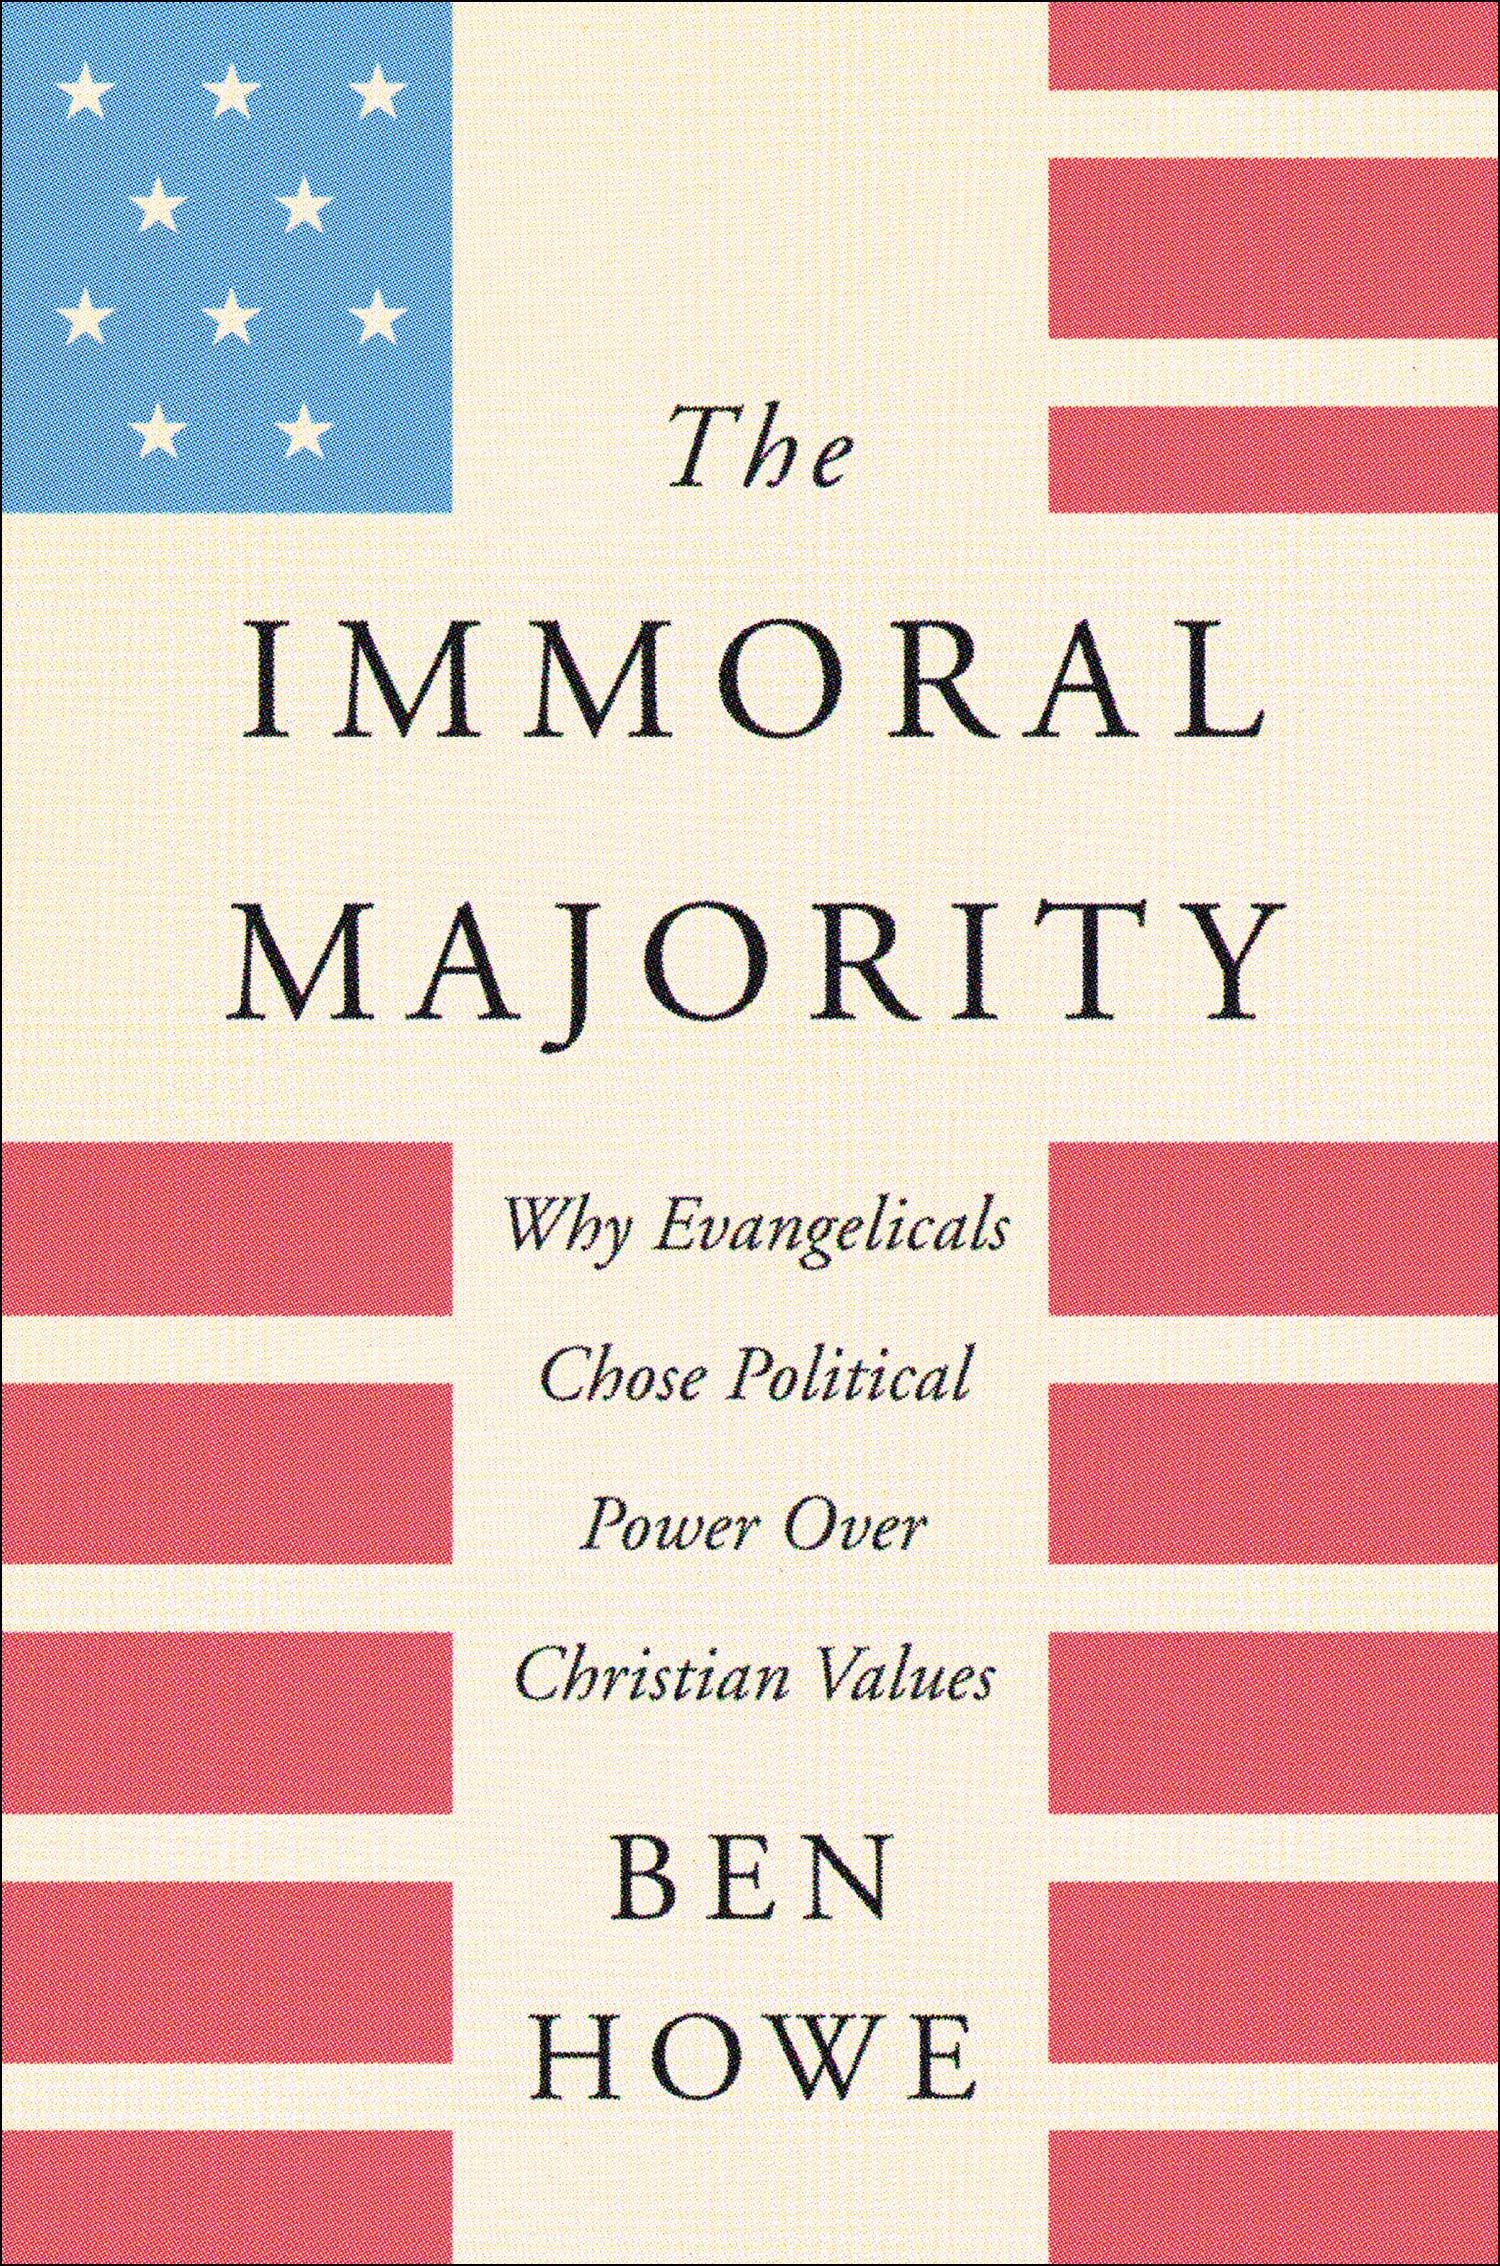 The immoral majority why evangelicals chose political power over Christian values cover image